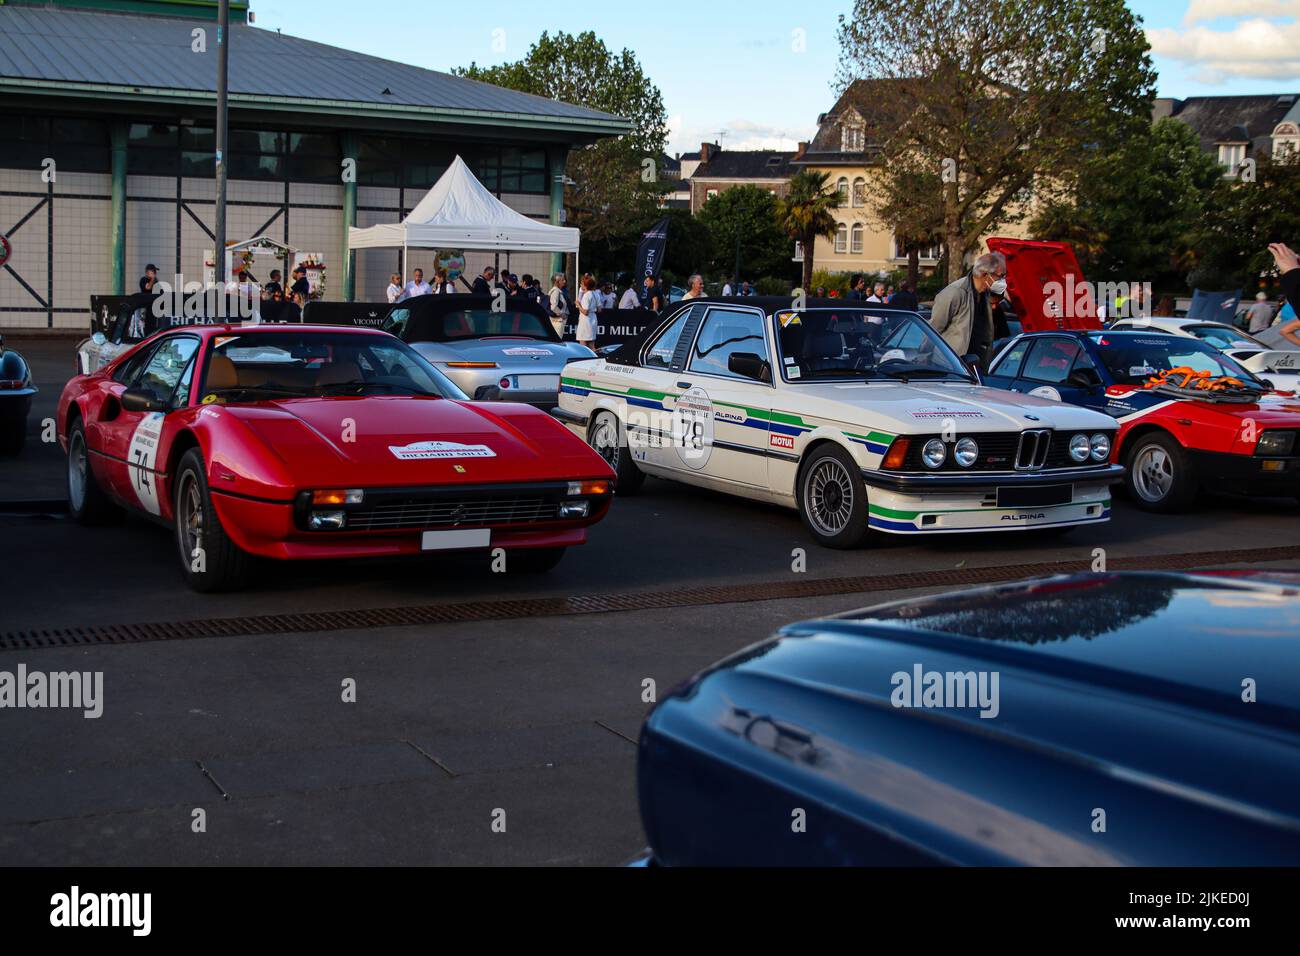 The Ferrari 308 GTB and BMW 3 series cars during the Rallye des Princesses event Stock Photo